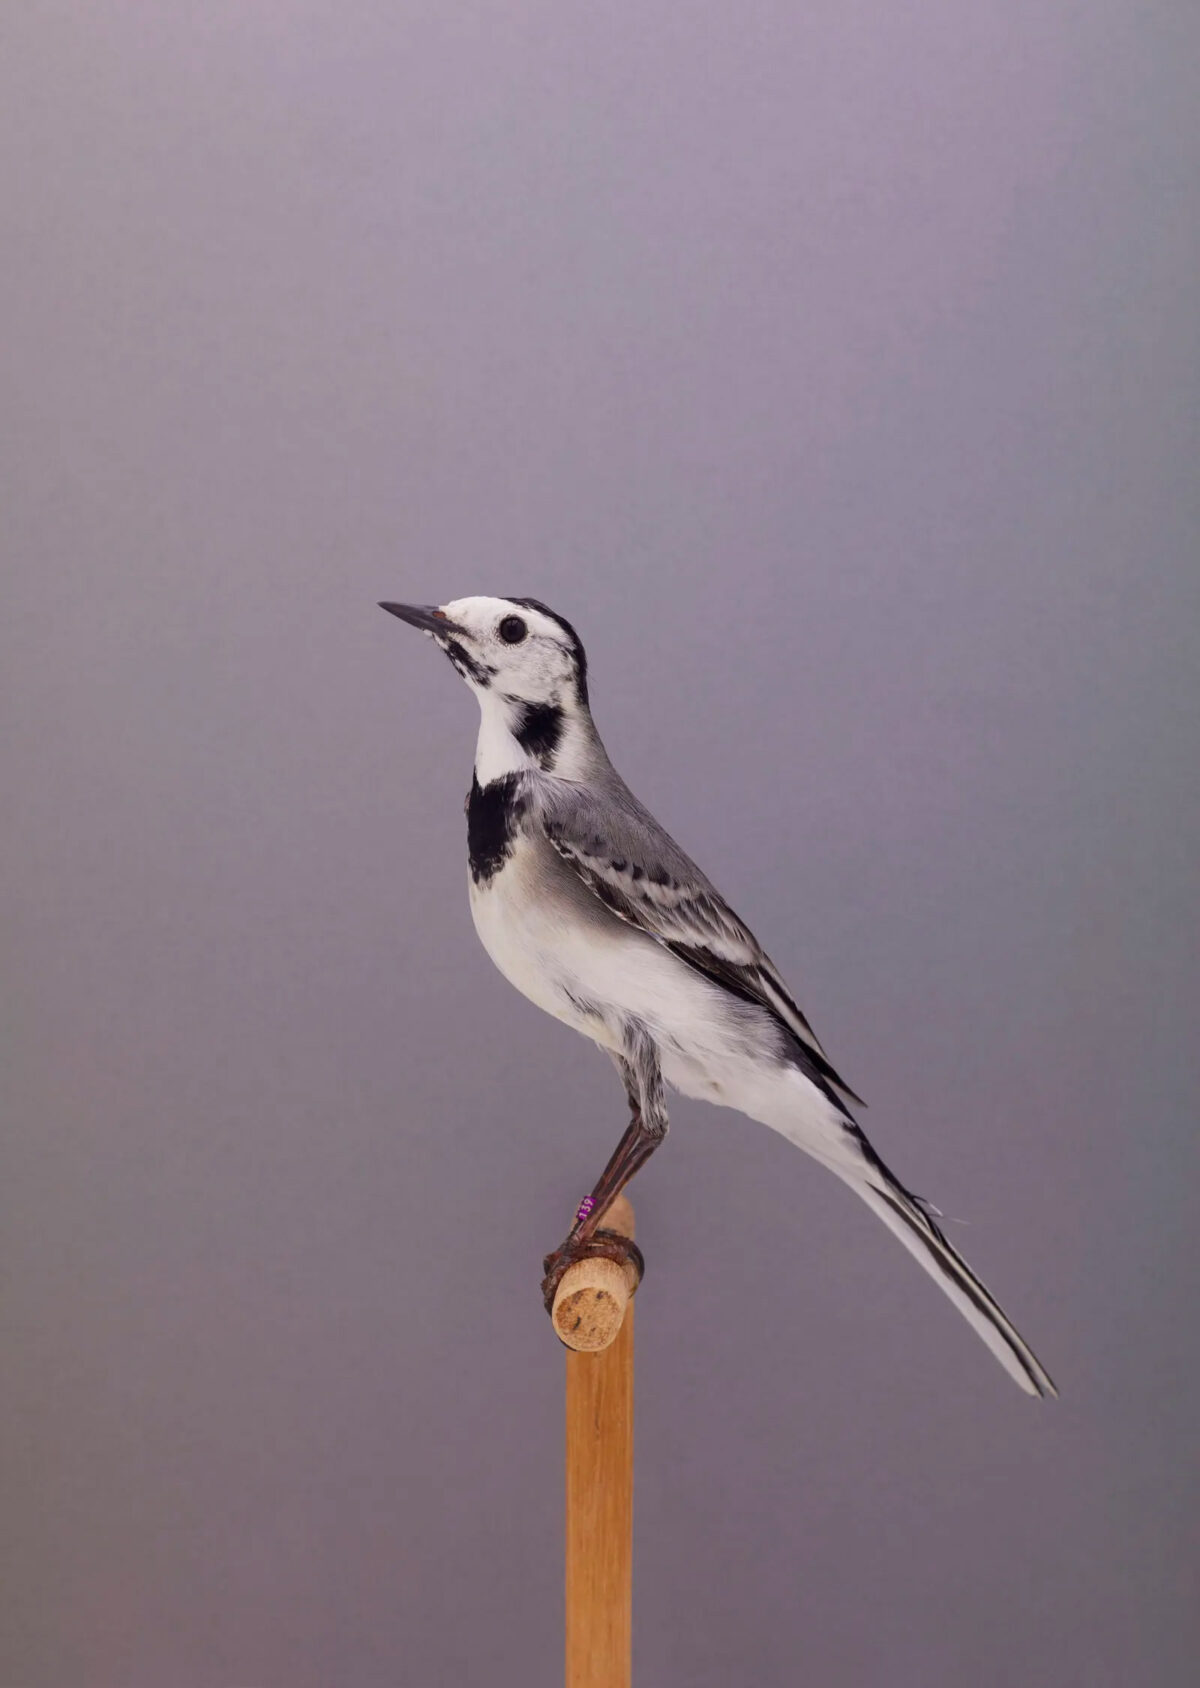 An Incomplete Dictionary Of Show Birds A Minimalist Bird Photography Series By Luke Stephenson (7)